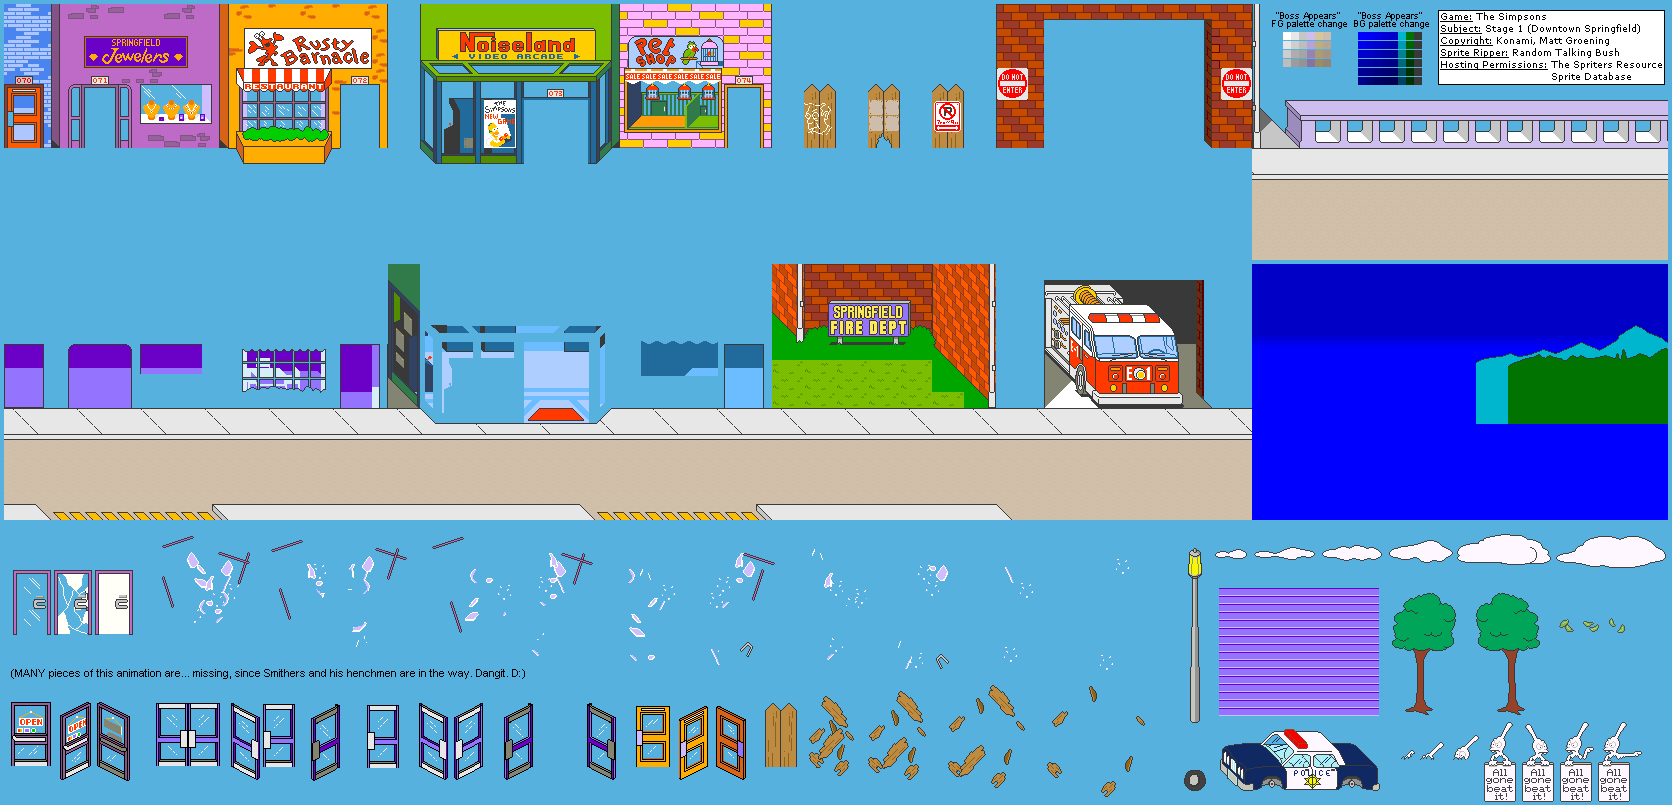 The Simpsons - Stage 1: Downtown Springfield